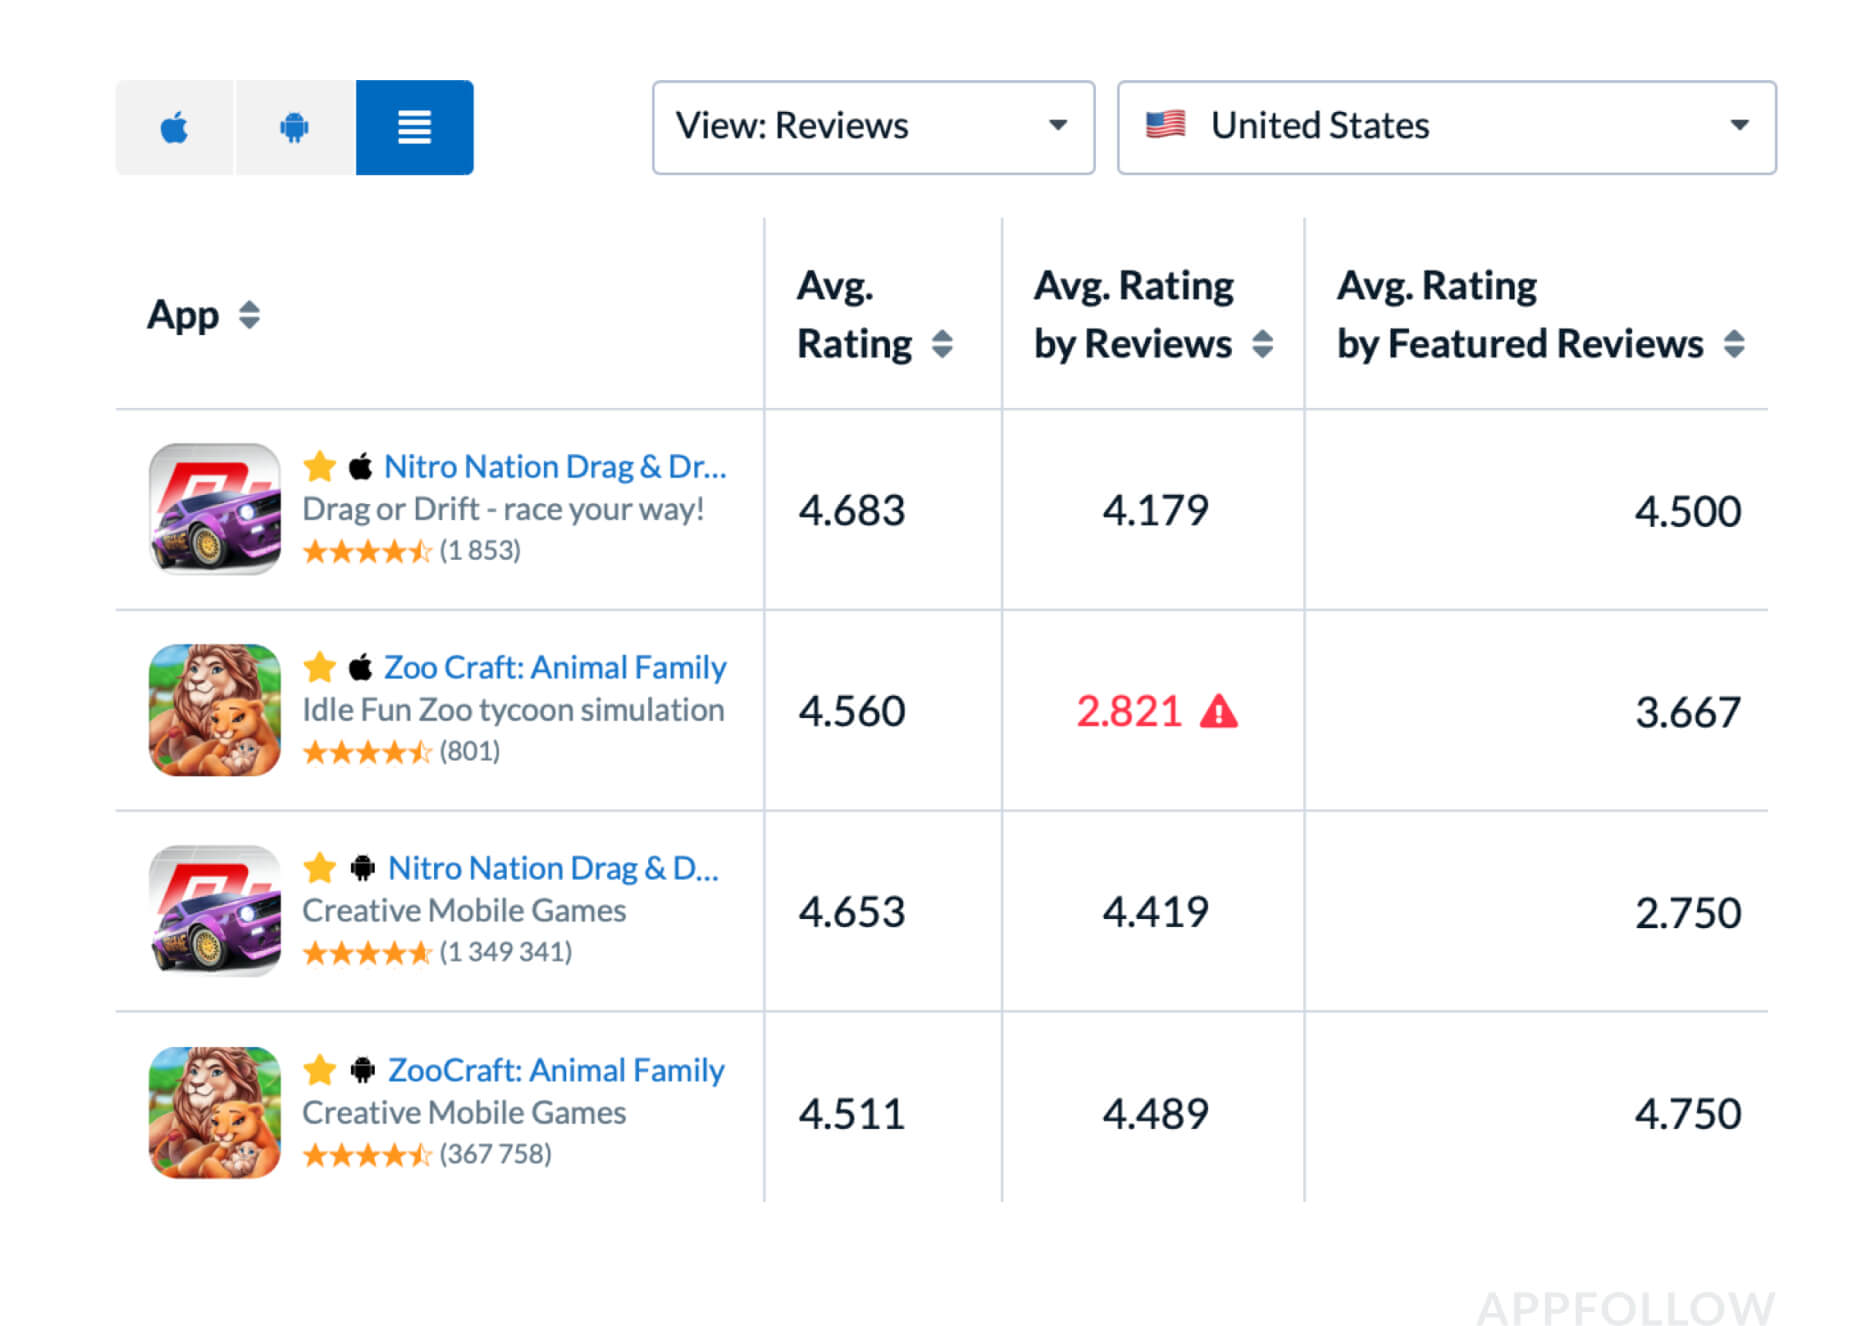 If the Average Rating and Rating by Reviews differ significantly, it means there's something wrong with the support team. Source: appfollow.io